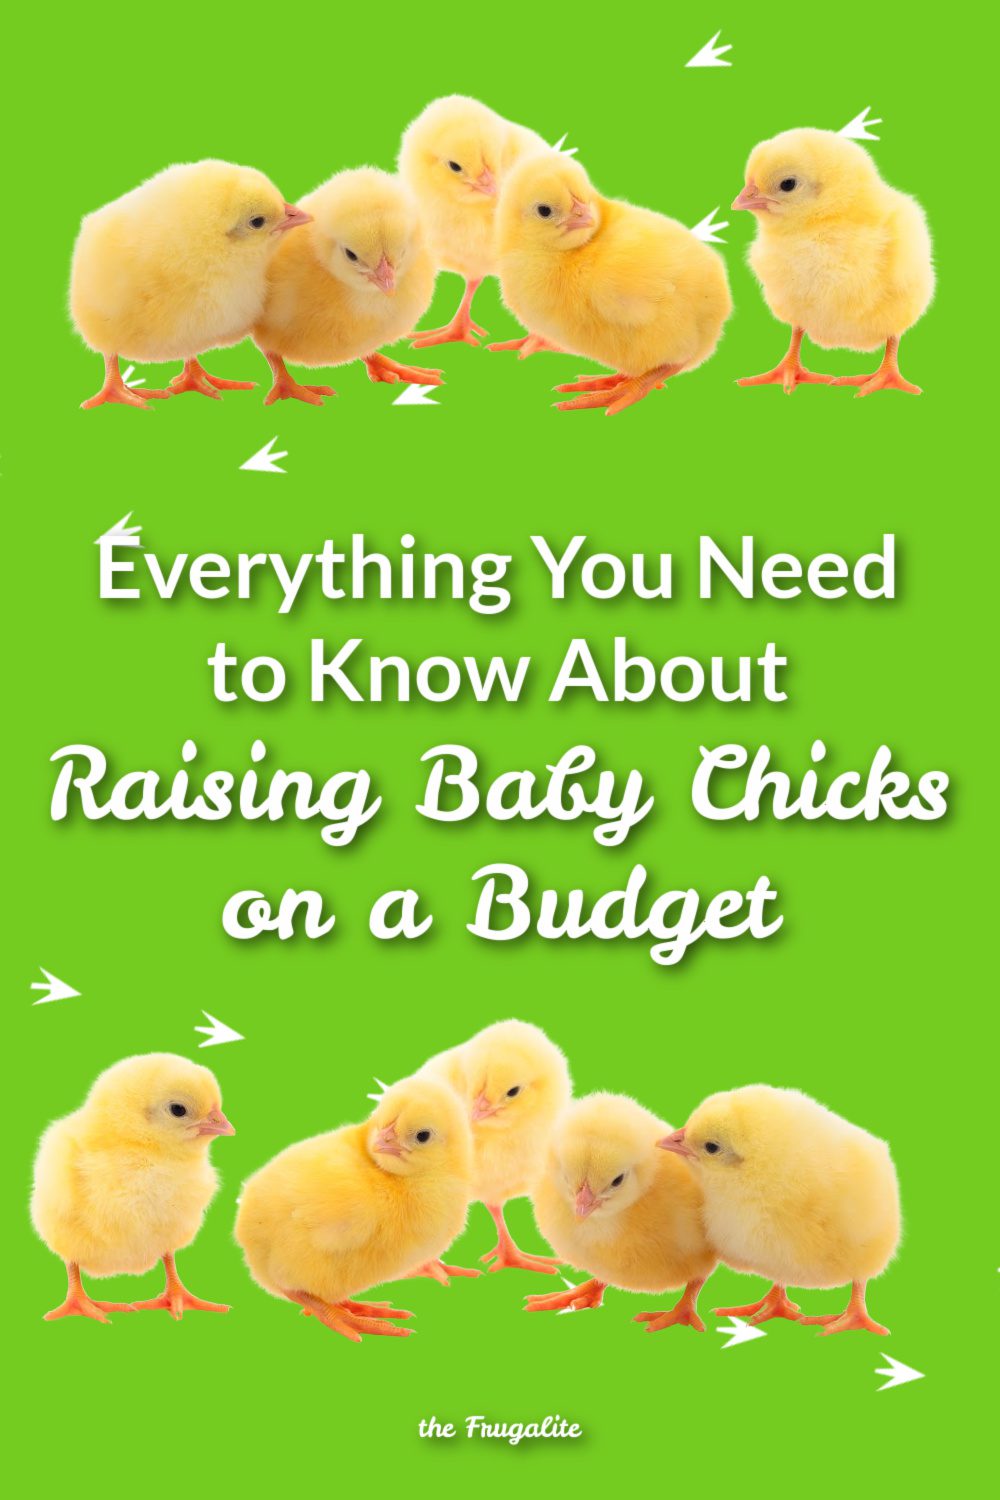 Everything You Need to Know About Raising Baby Chicks on a Budget